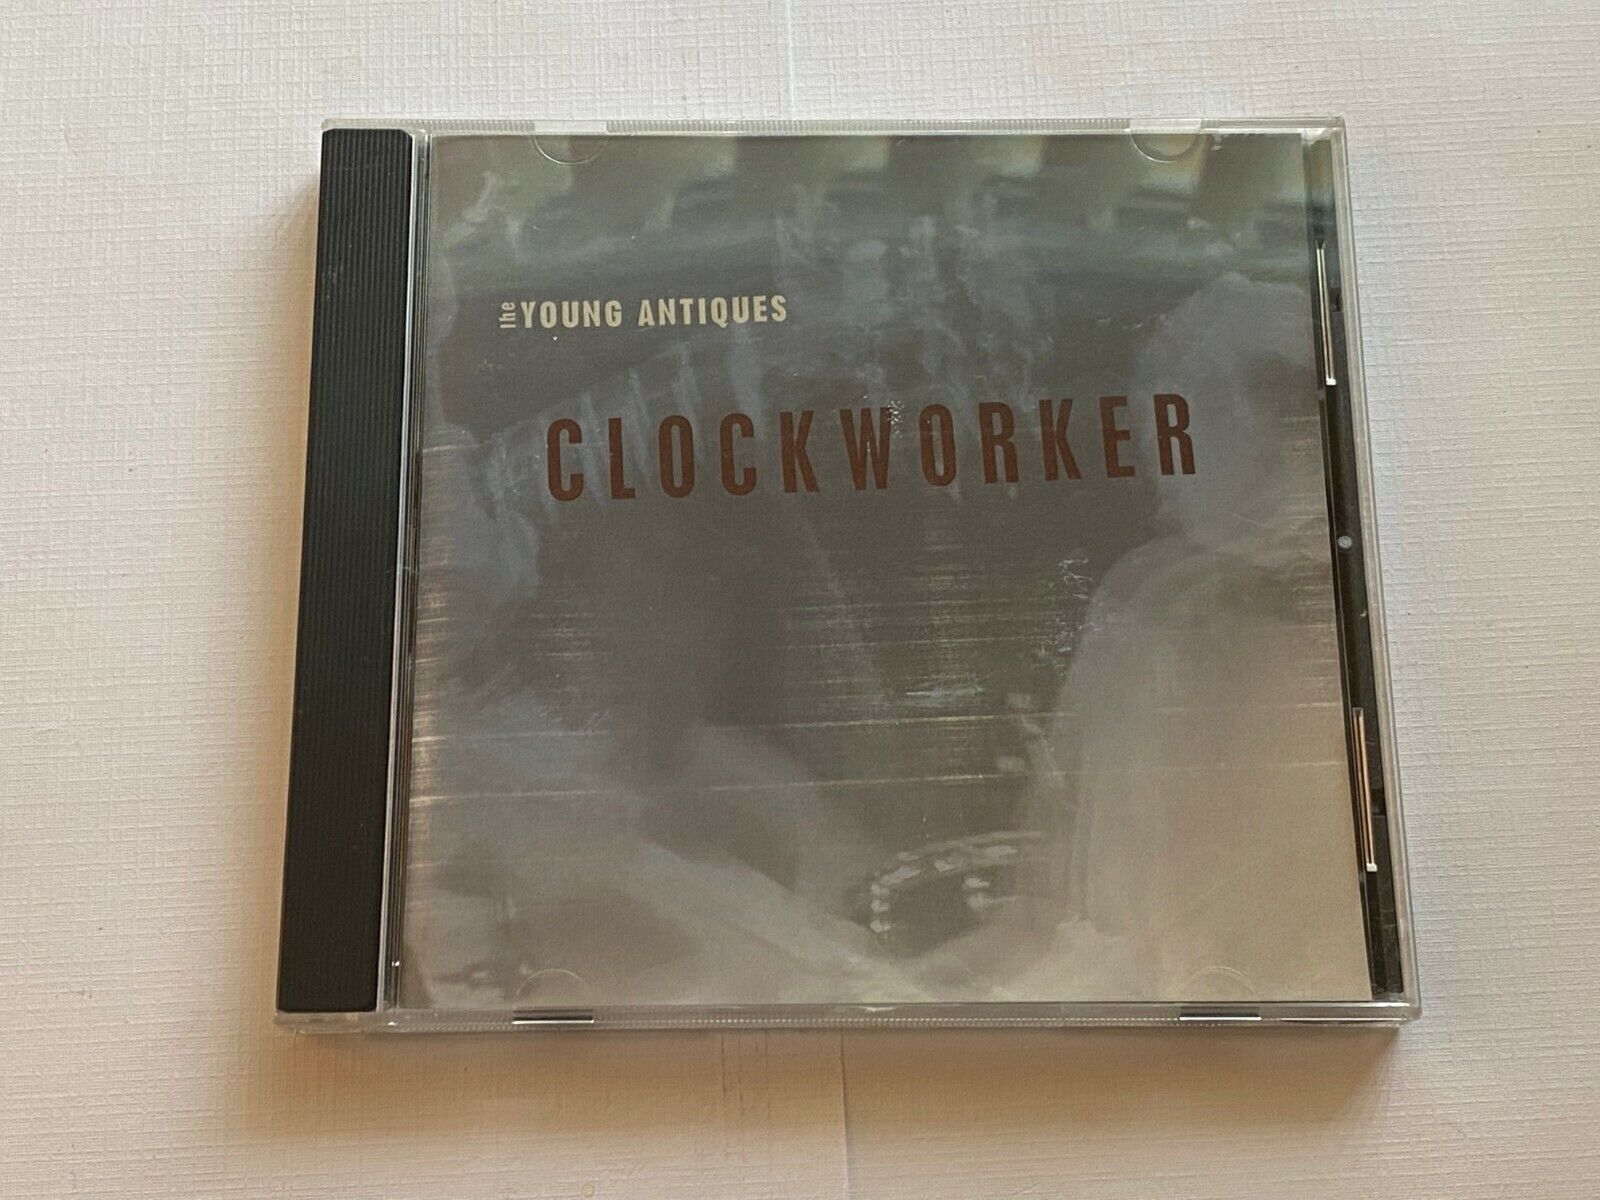 CD - THE YOUNG ANTIQUES - Clockworker - Clean Used - Guaranteed